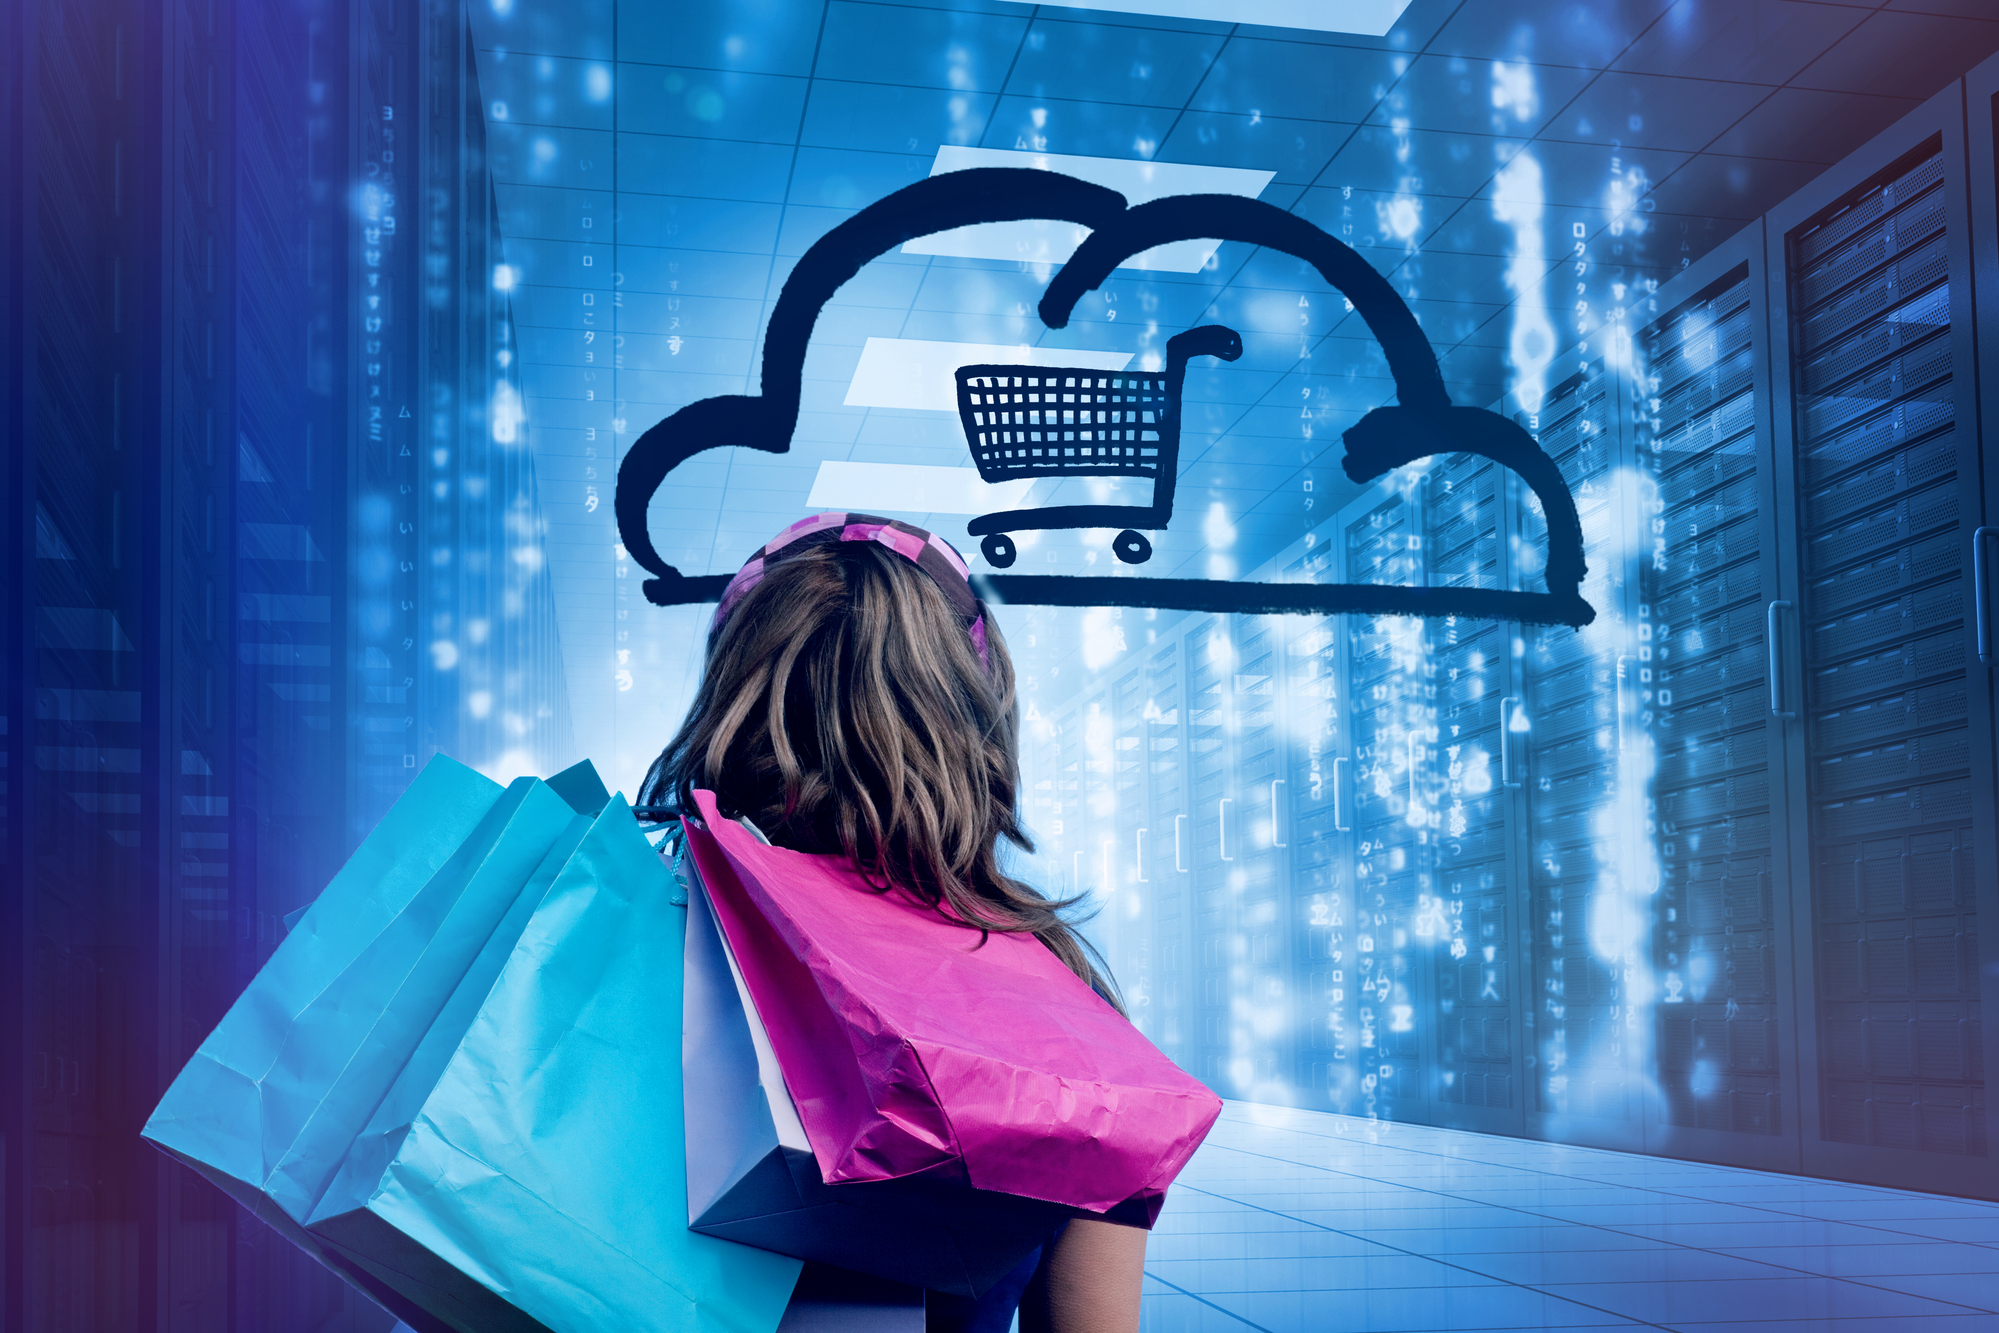 Woman-in-a-data-center-holding-shopping-bags-plus-digital-shopping-trolley